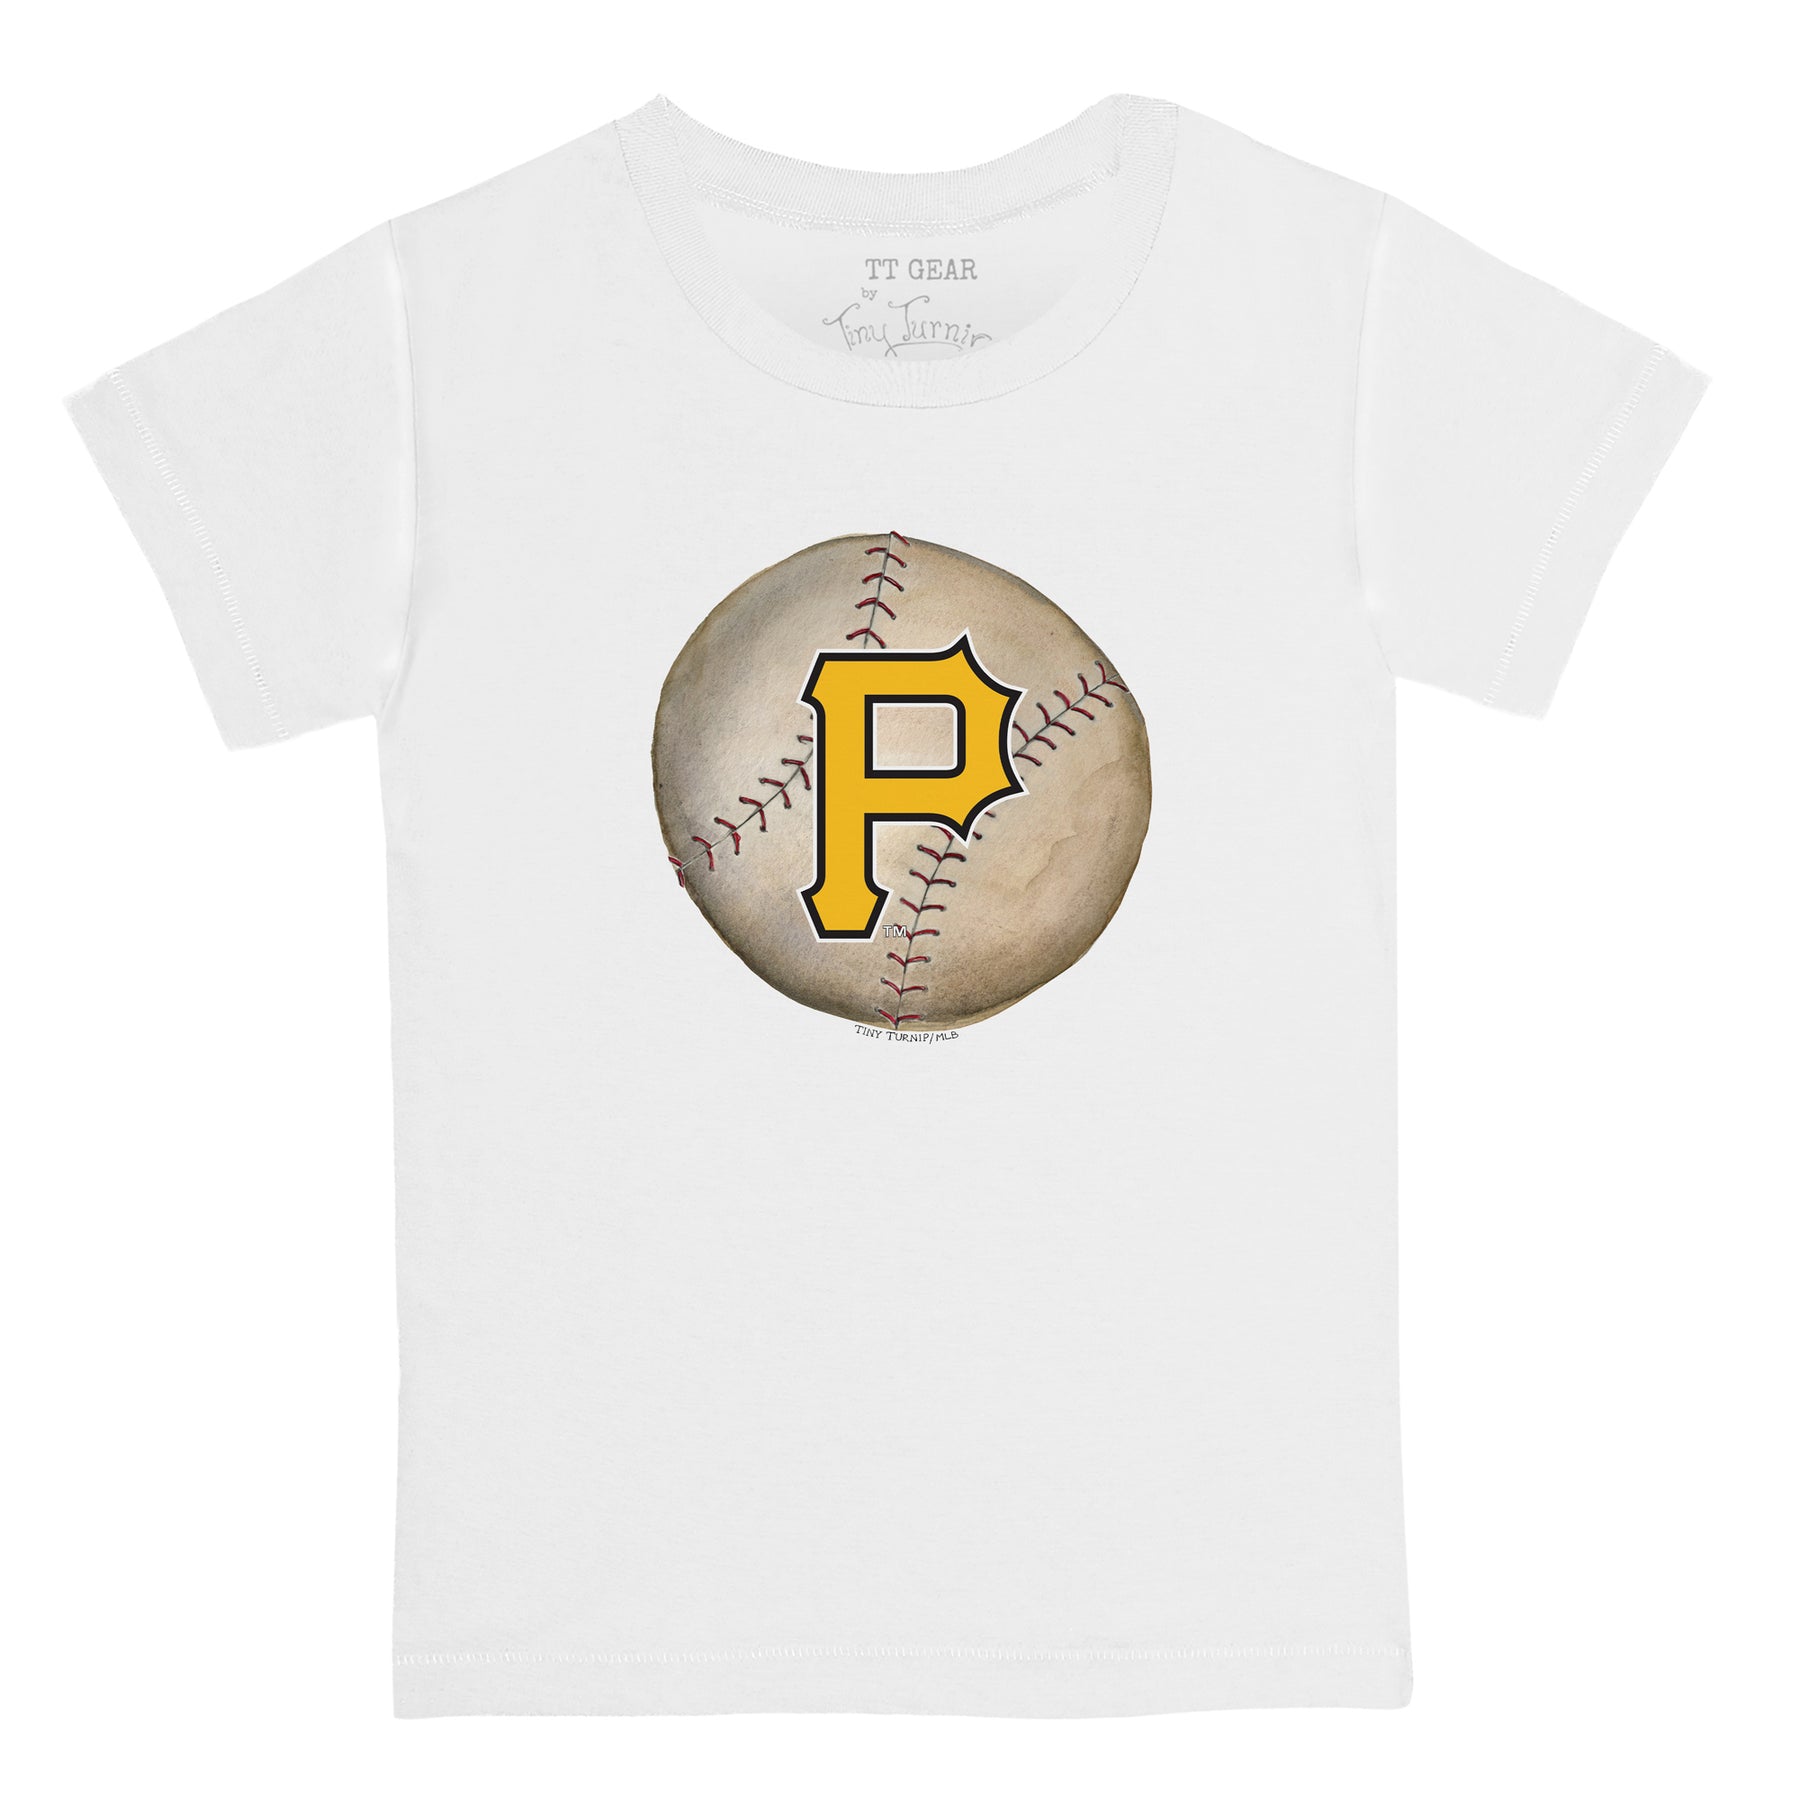 Pittsburgh Pirates Boys MLB Jerseys for sale